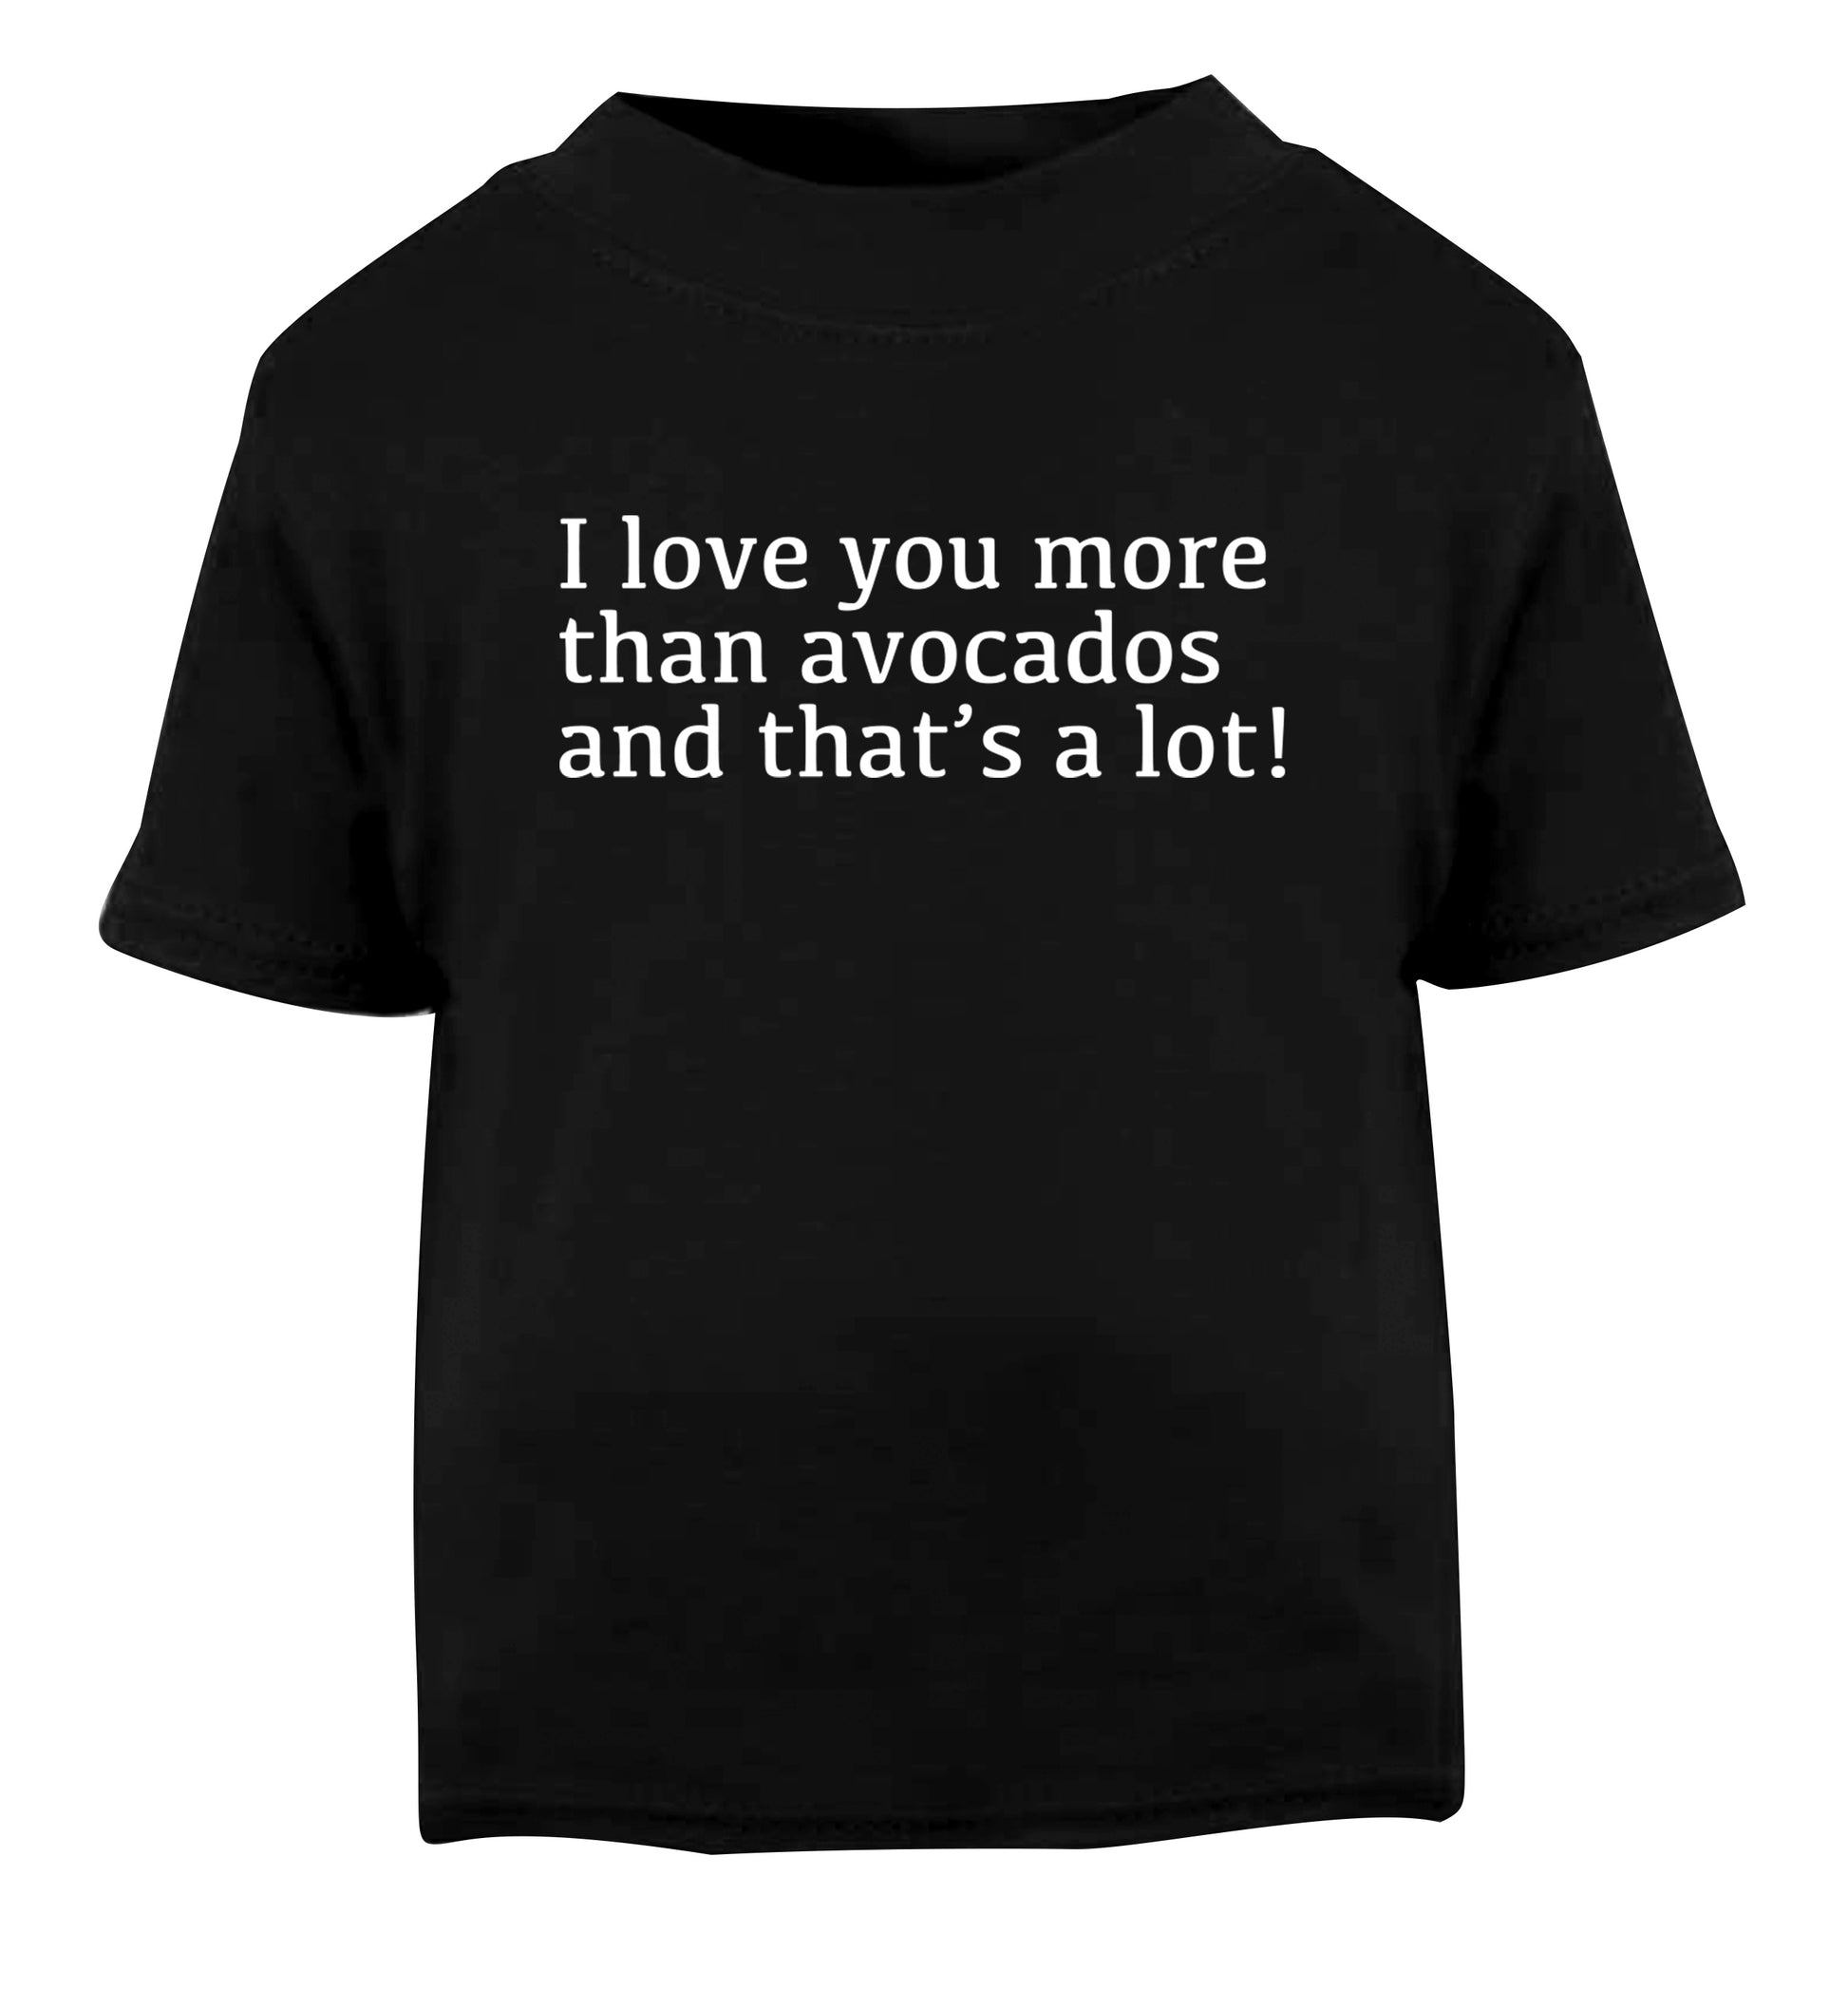 I love you more than avocados and that's a lot Black Baby Toddler Tshirt 2 years